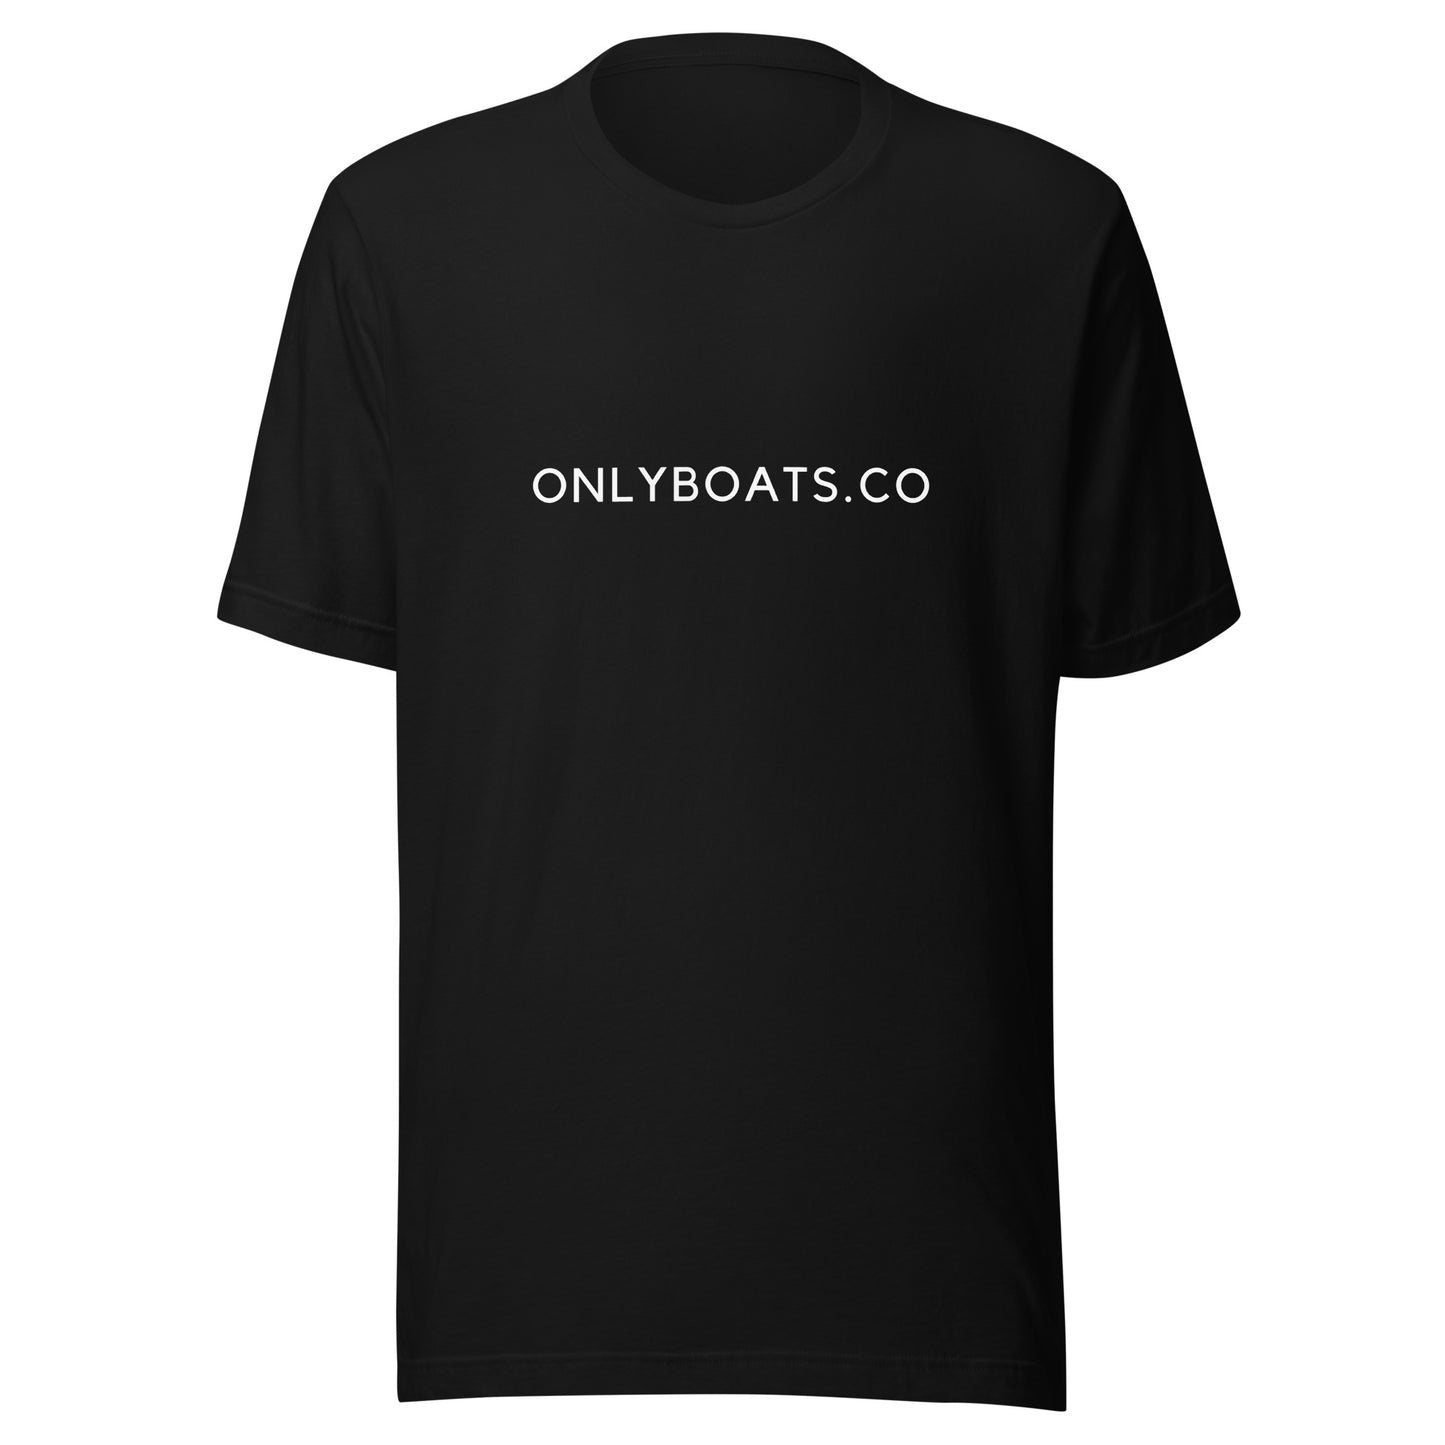 Onlyboats.co t-shirt - ONLY BOATS